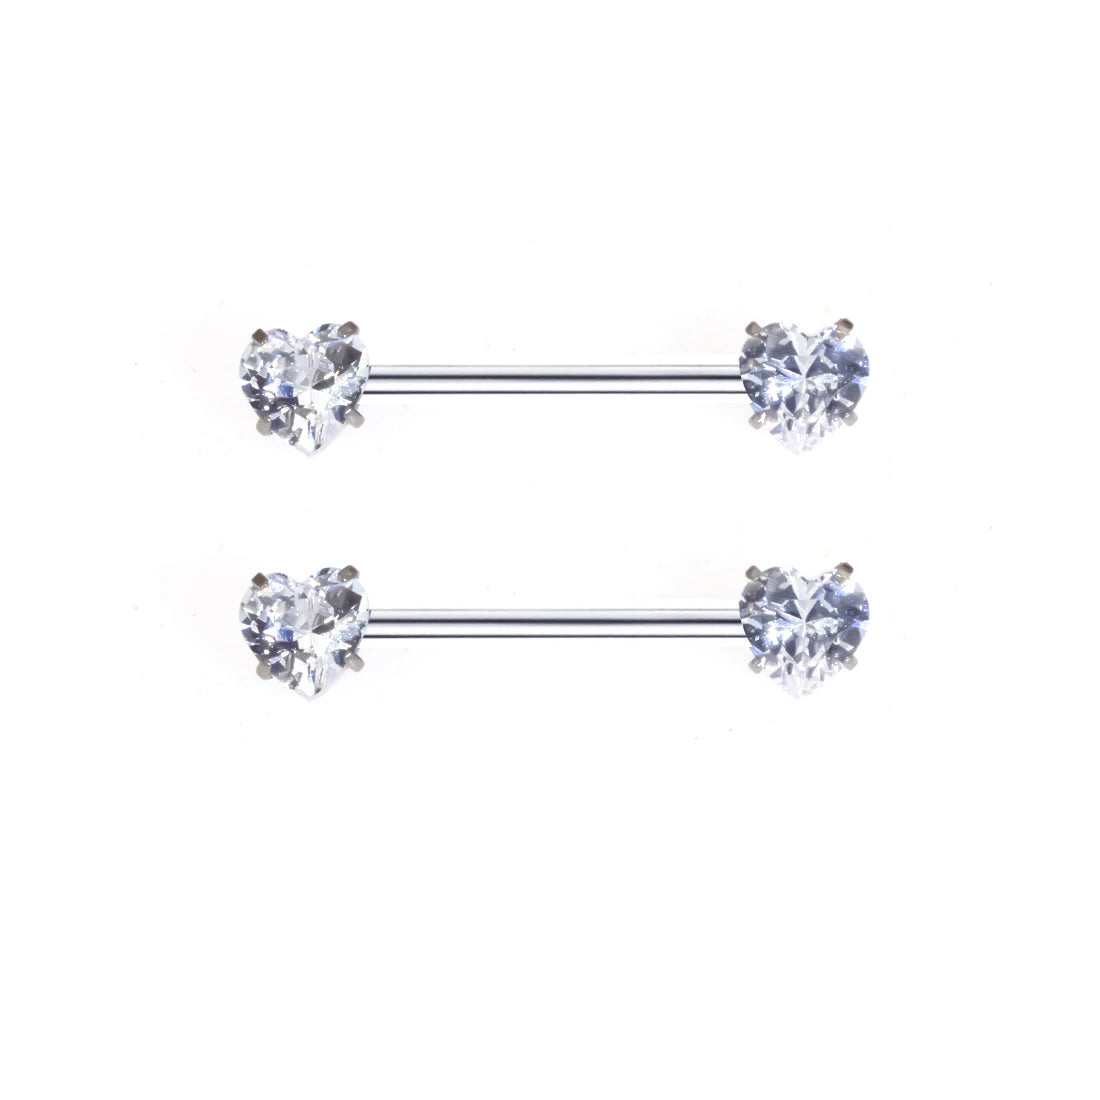 Heart nipple rings with diamonds gold and silver titanium 2 pieces nipple piercing barbells 16G